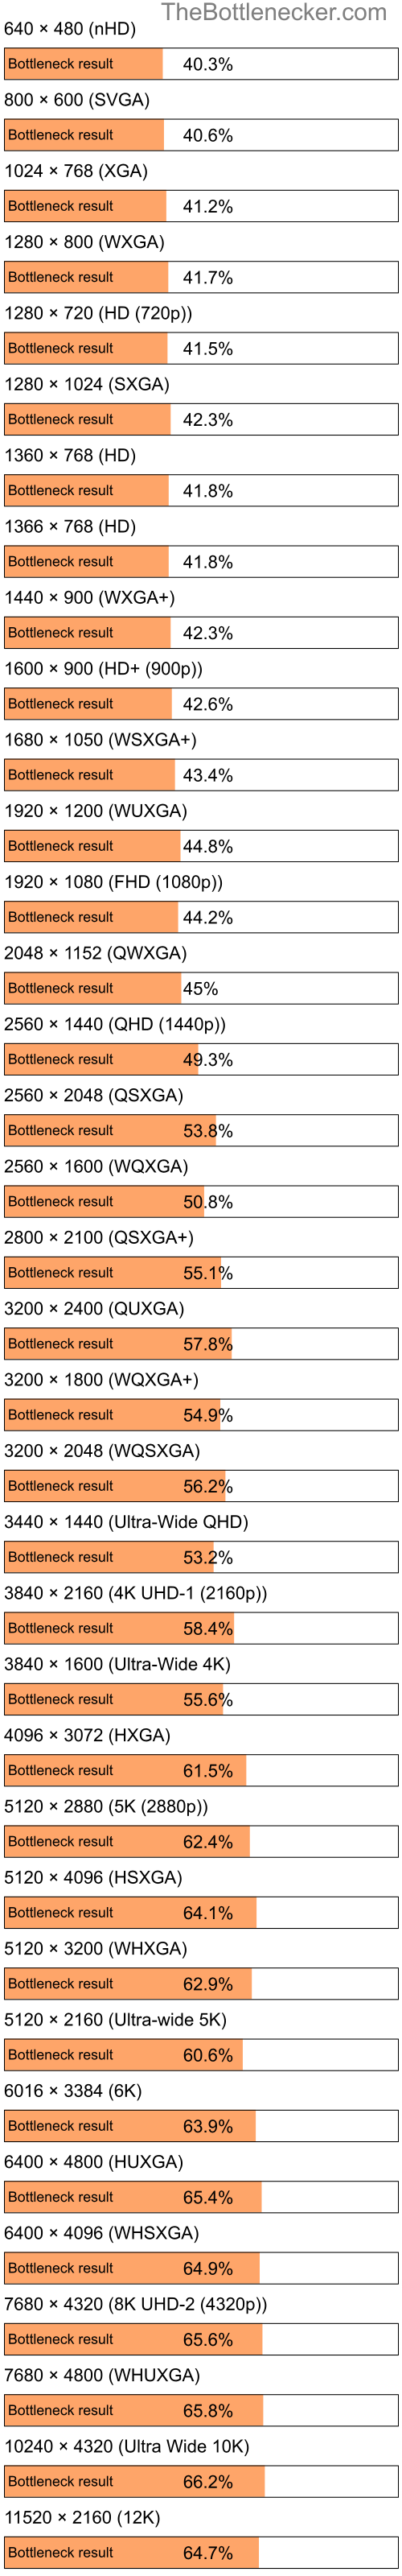 Bottleneck results by resolution for AMD Ryzen Threadripper PRO 7995WX and NVIDIA GeForce GTX 1060 in General Tasks